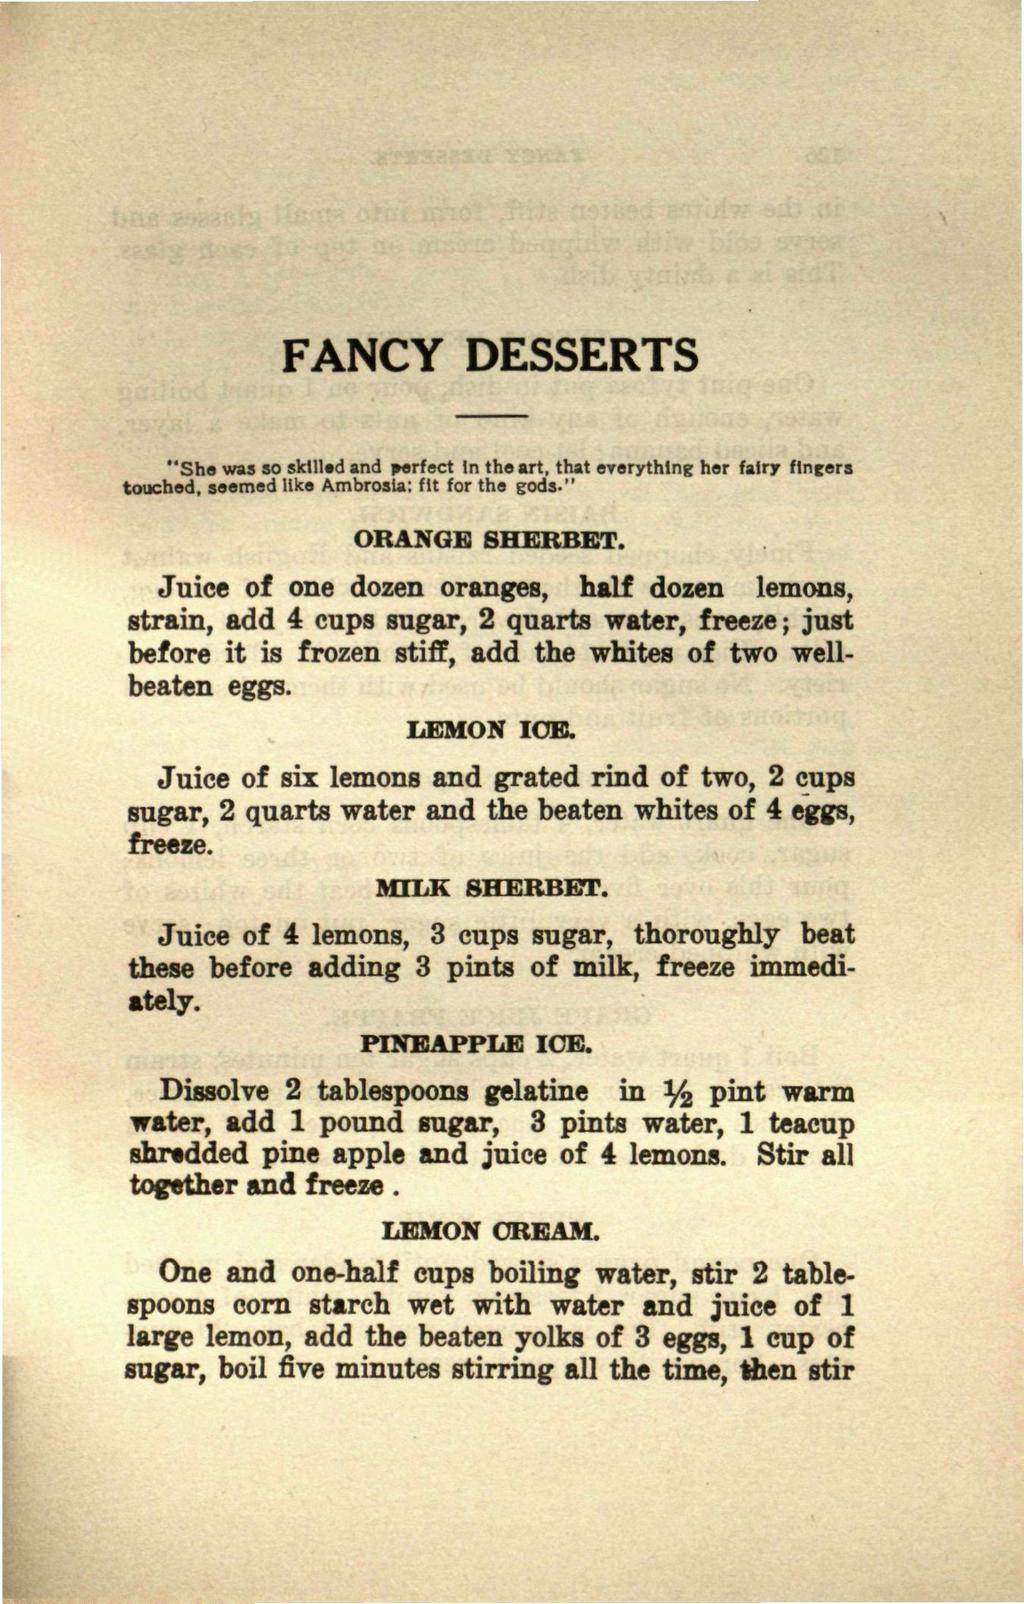 FANCY DESSERTS "She was so skilled and perfect In the art. that everything her fatry fingers touched, seemed like Ambrosia: fit for the gods-" ORANGE SHERBET.